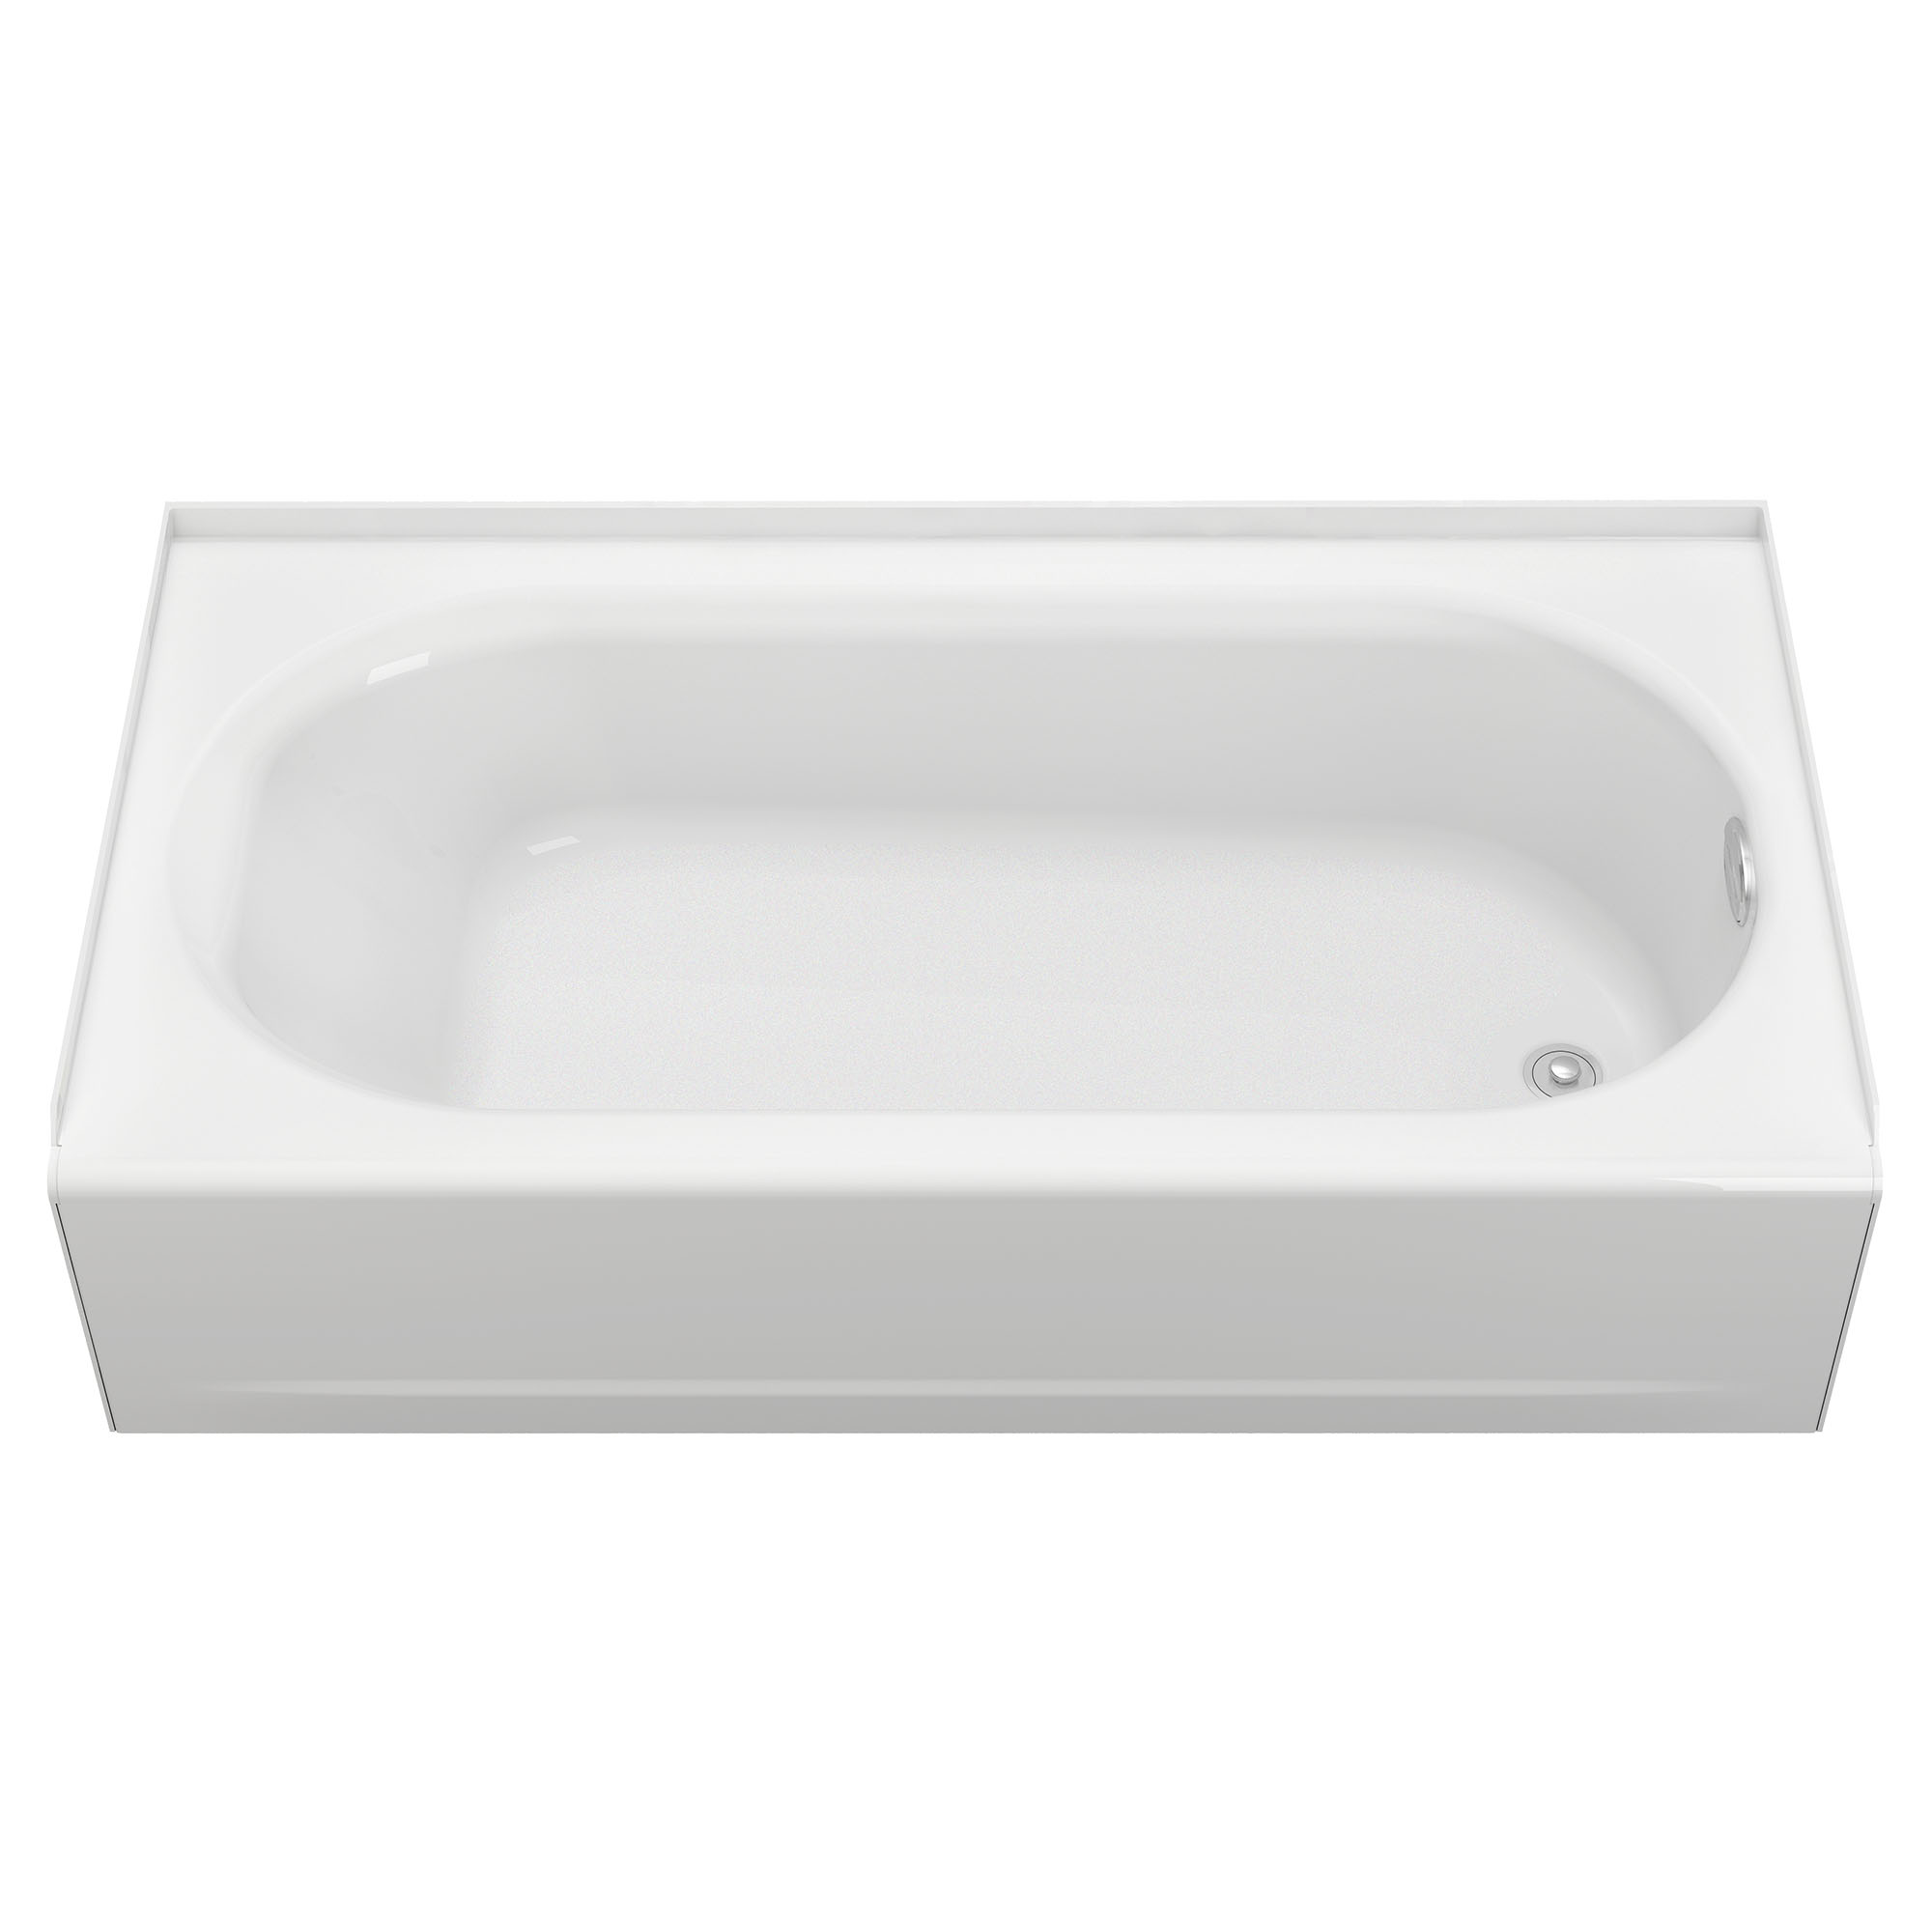 Princeton® Americast® 60 x 34-Inch Integral Apron Bathtub Right-Hand Outlet Luxury Ledge with Integral Drain